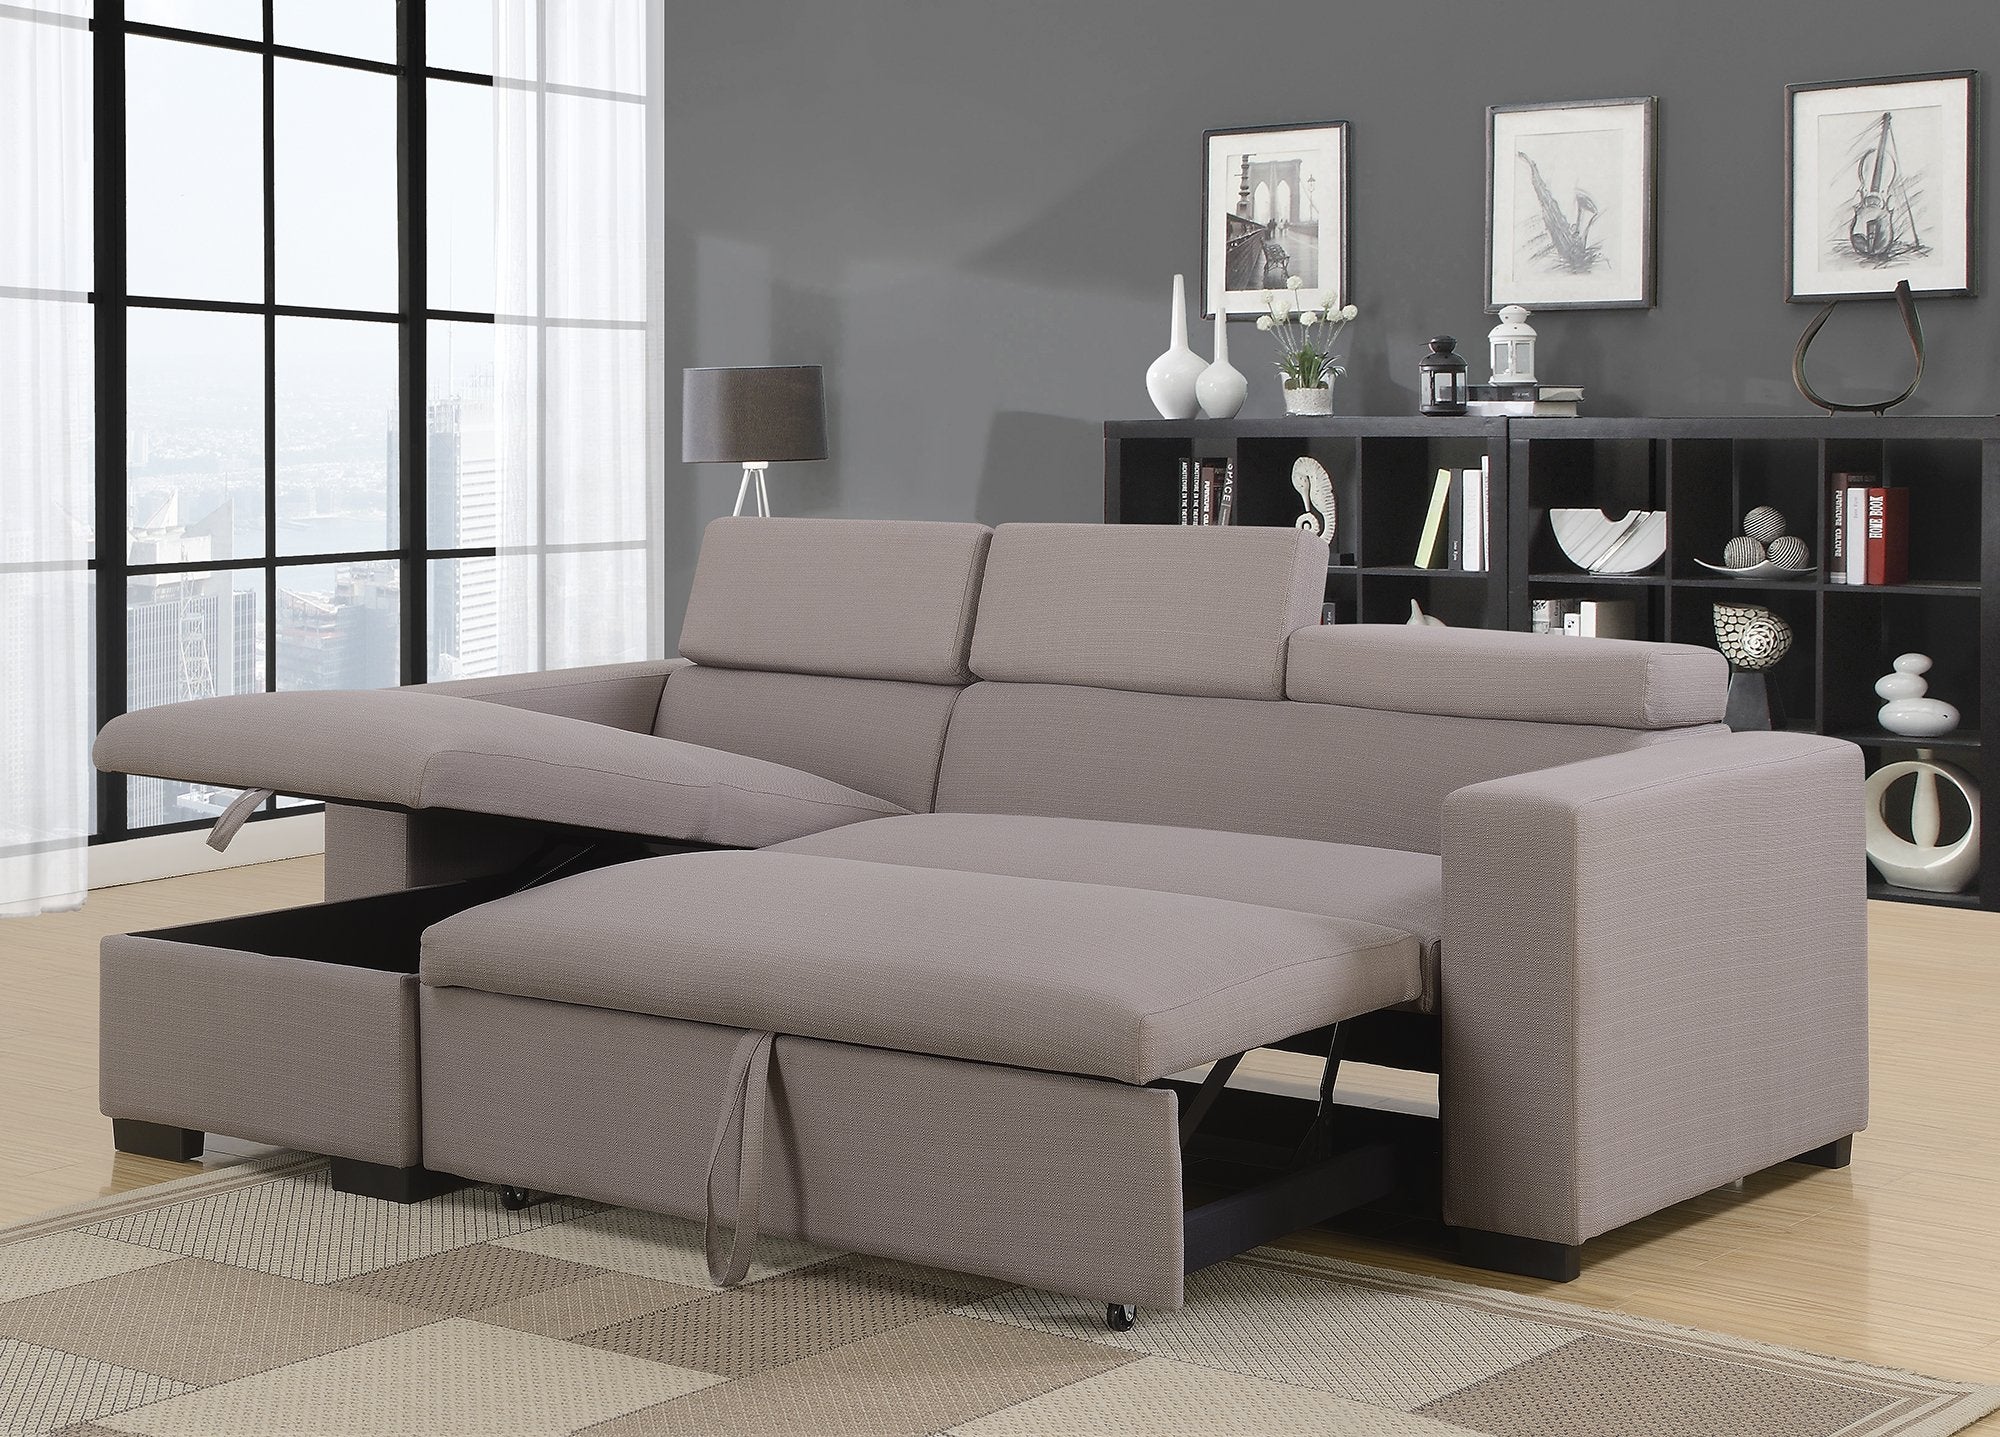 Linen Fabric 3 Seater Pullout Sofa Bed Modular With Storage Chaise Futon Corner 1959880 04 ?v=637273936638720150